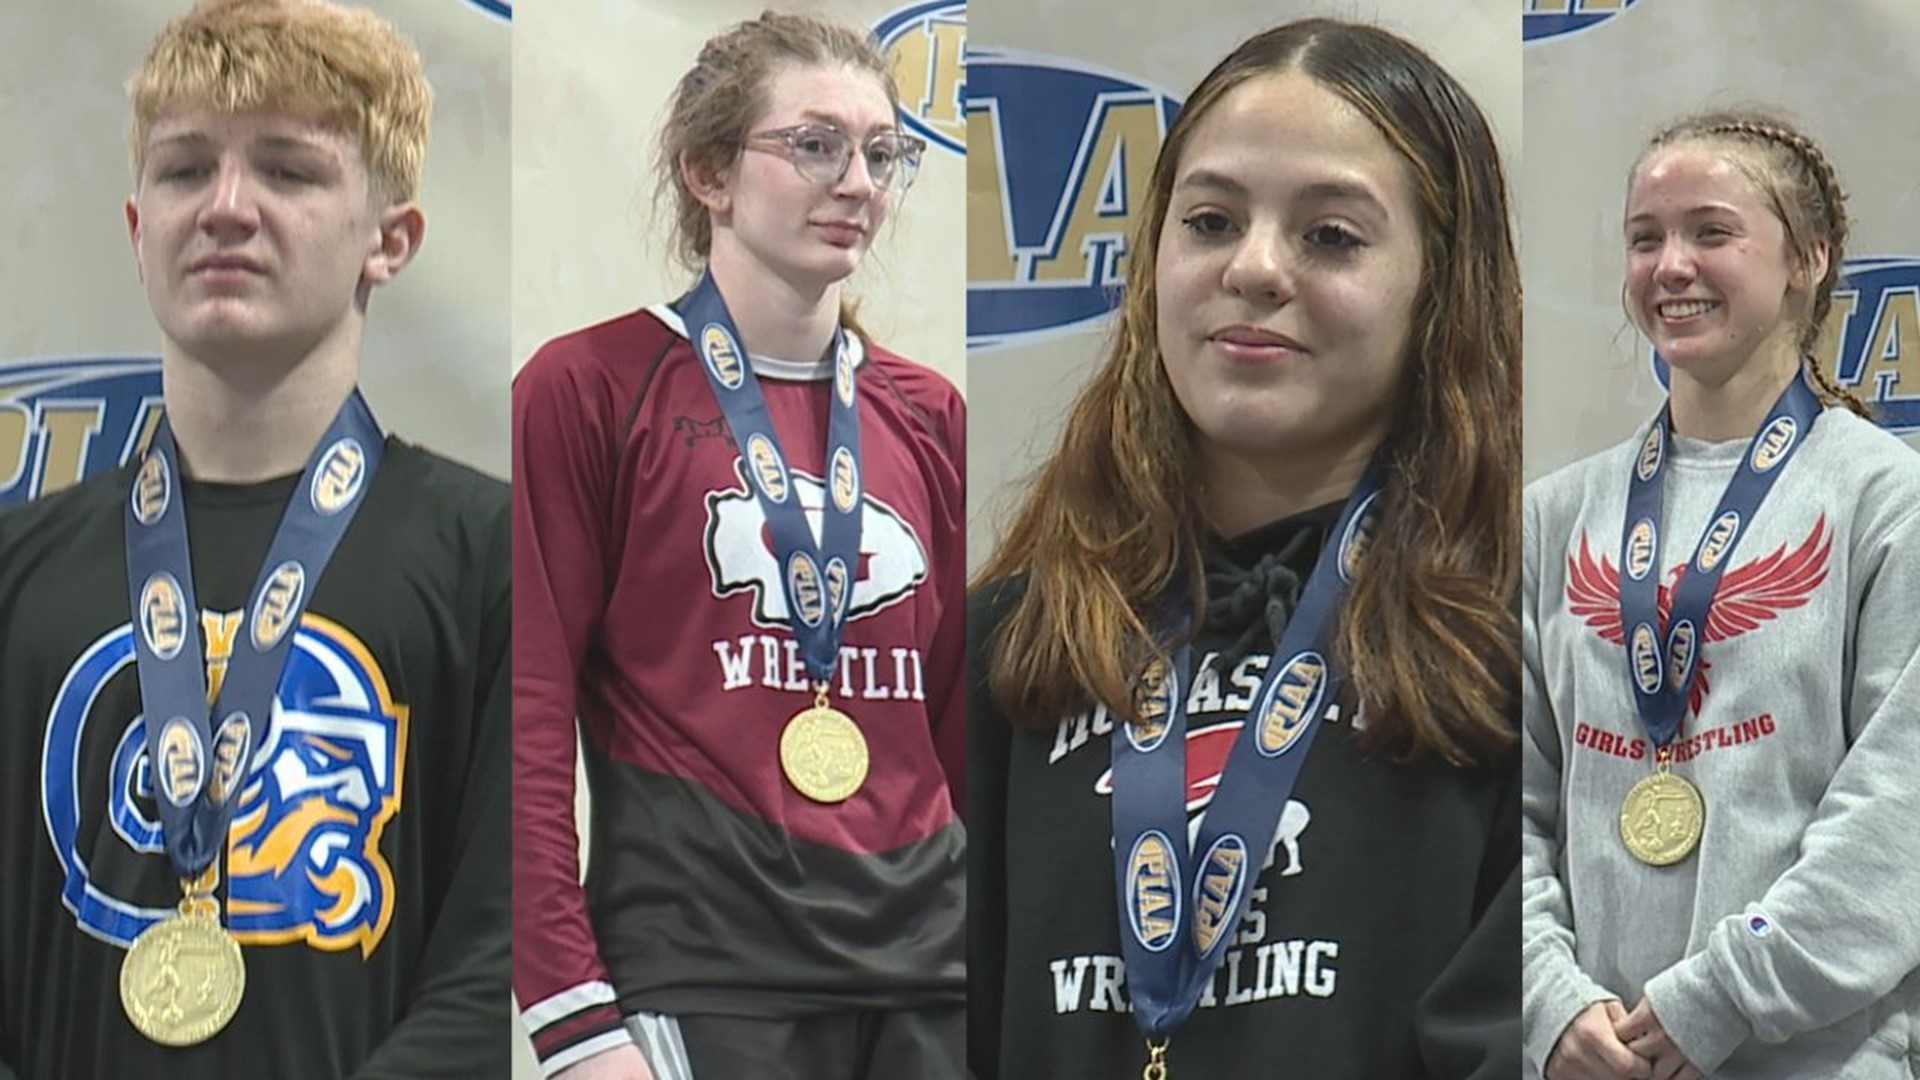 For the first time, the PIAA crowned girls wrestling state champs, while Northern Lebanon's Seidel makes it three straight.